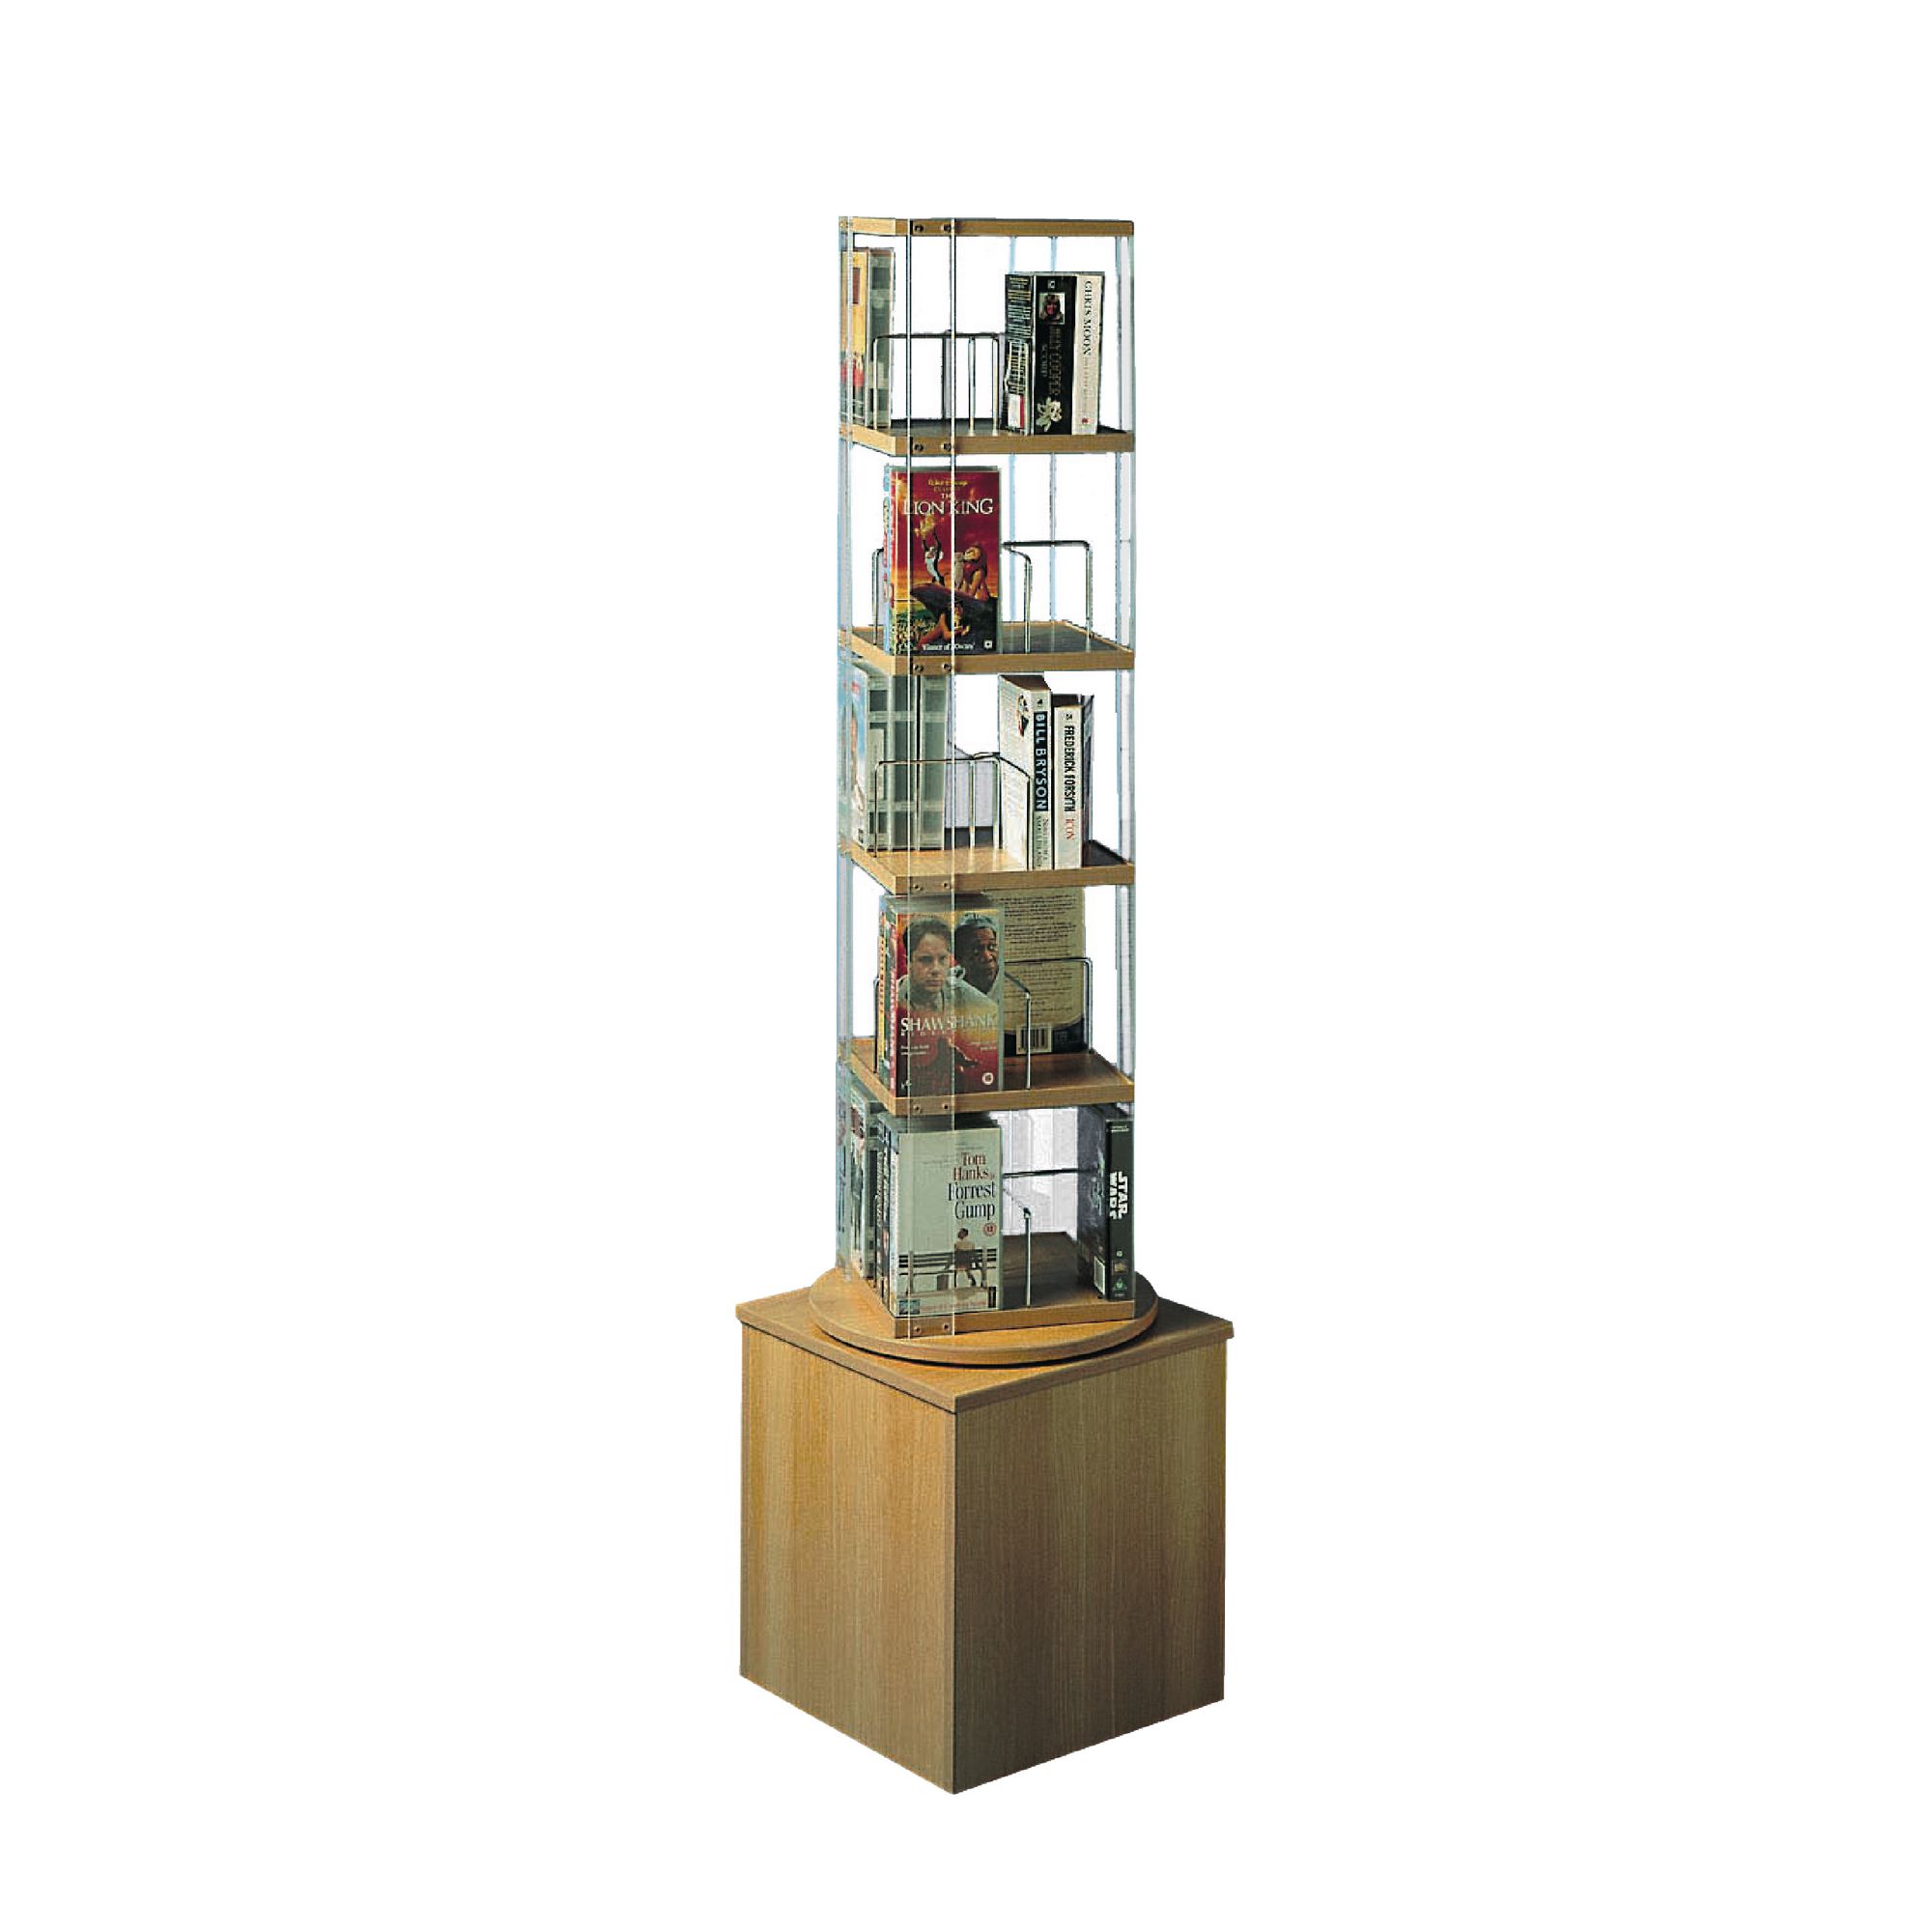 Adult Tower Paperback Spinner Beech